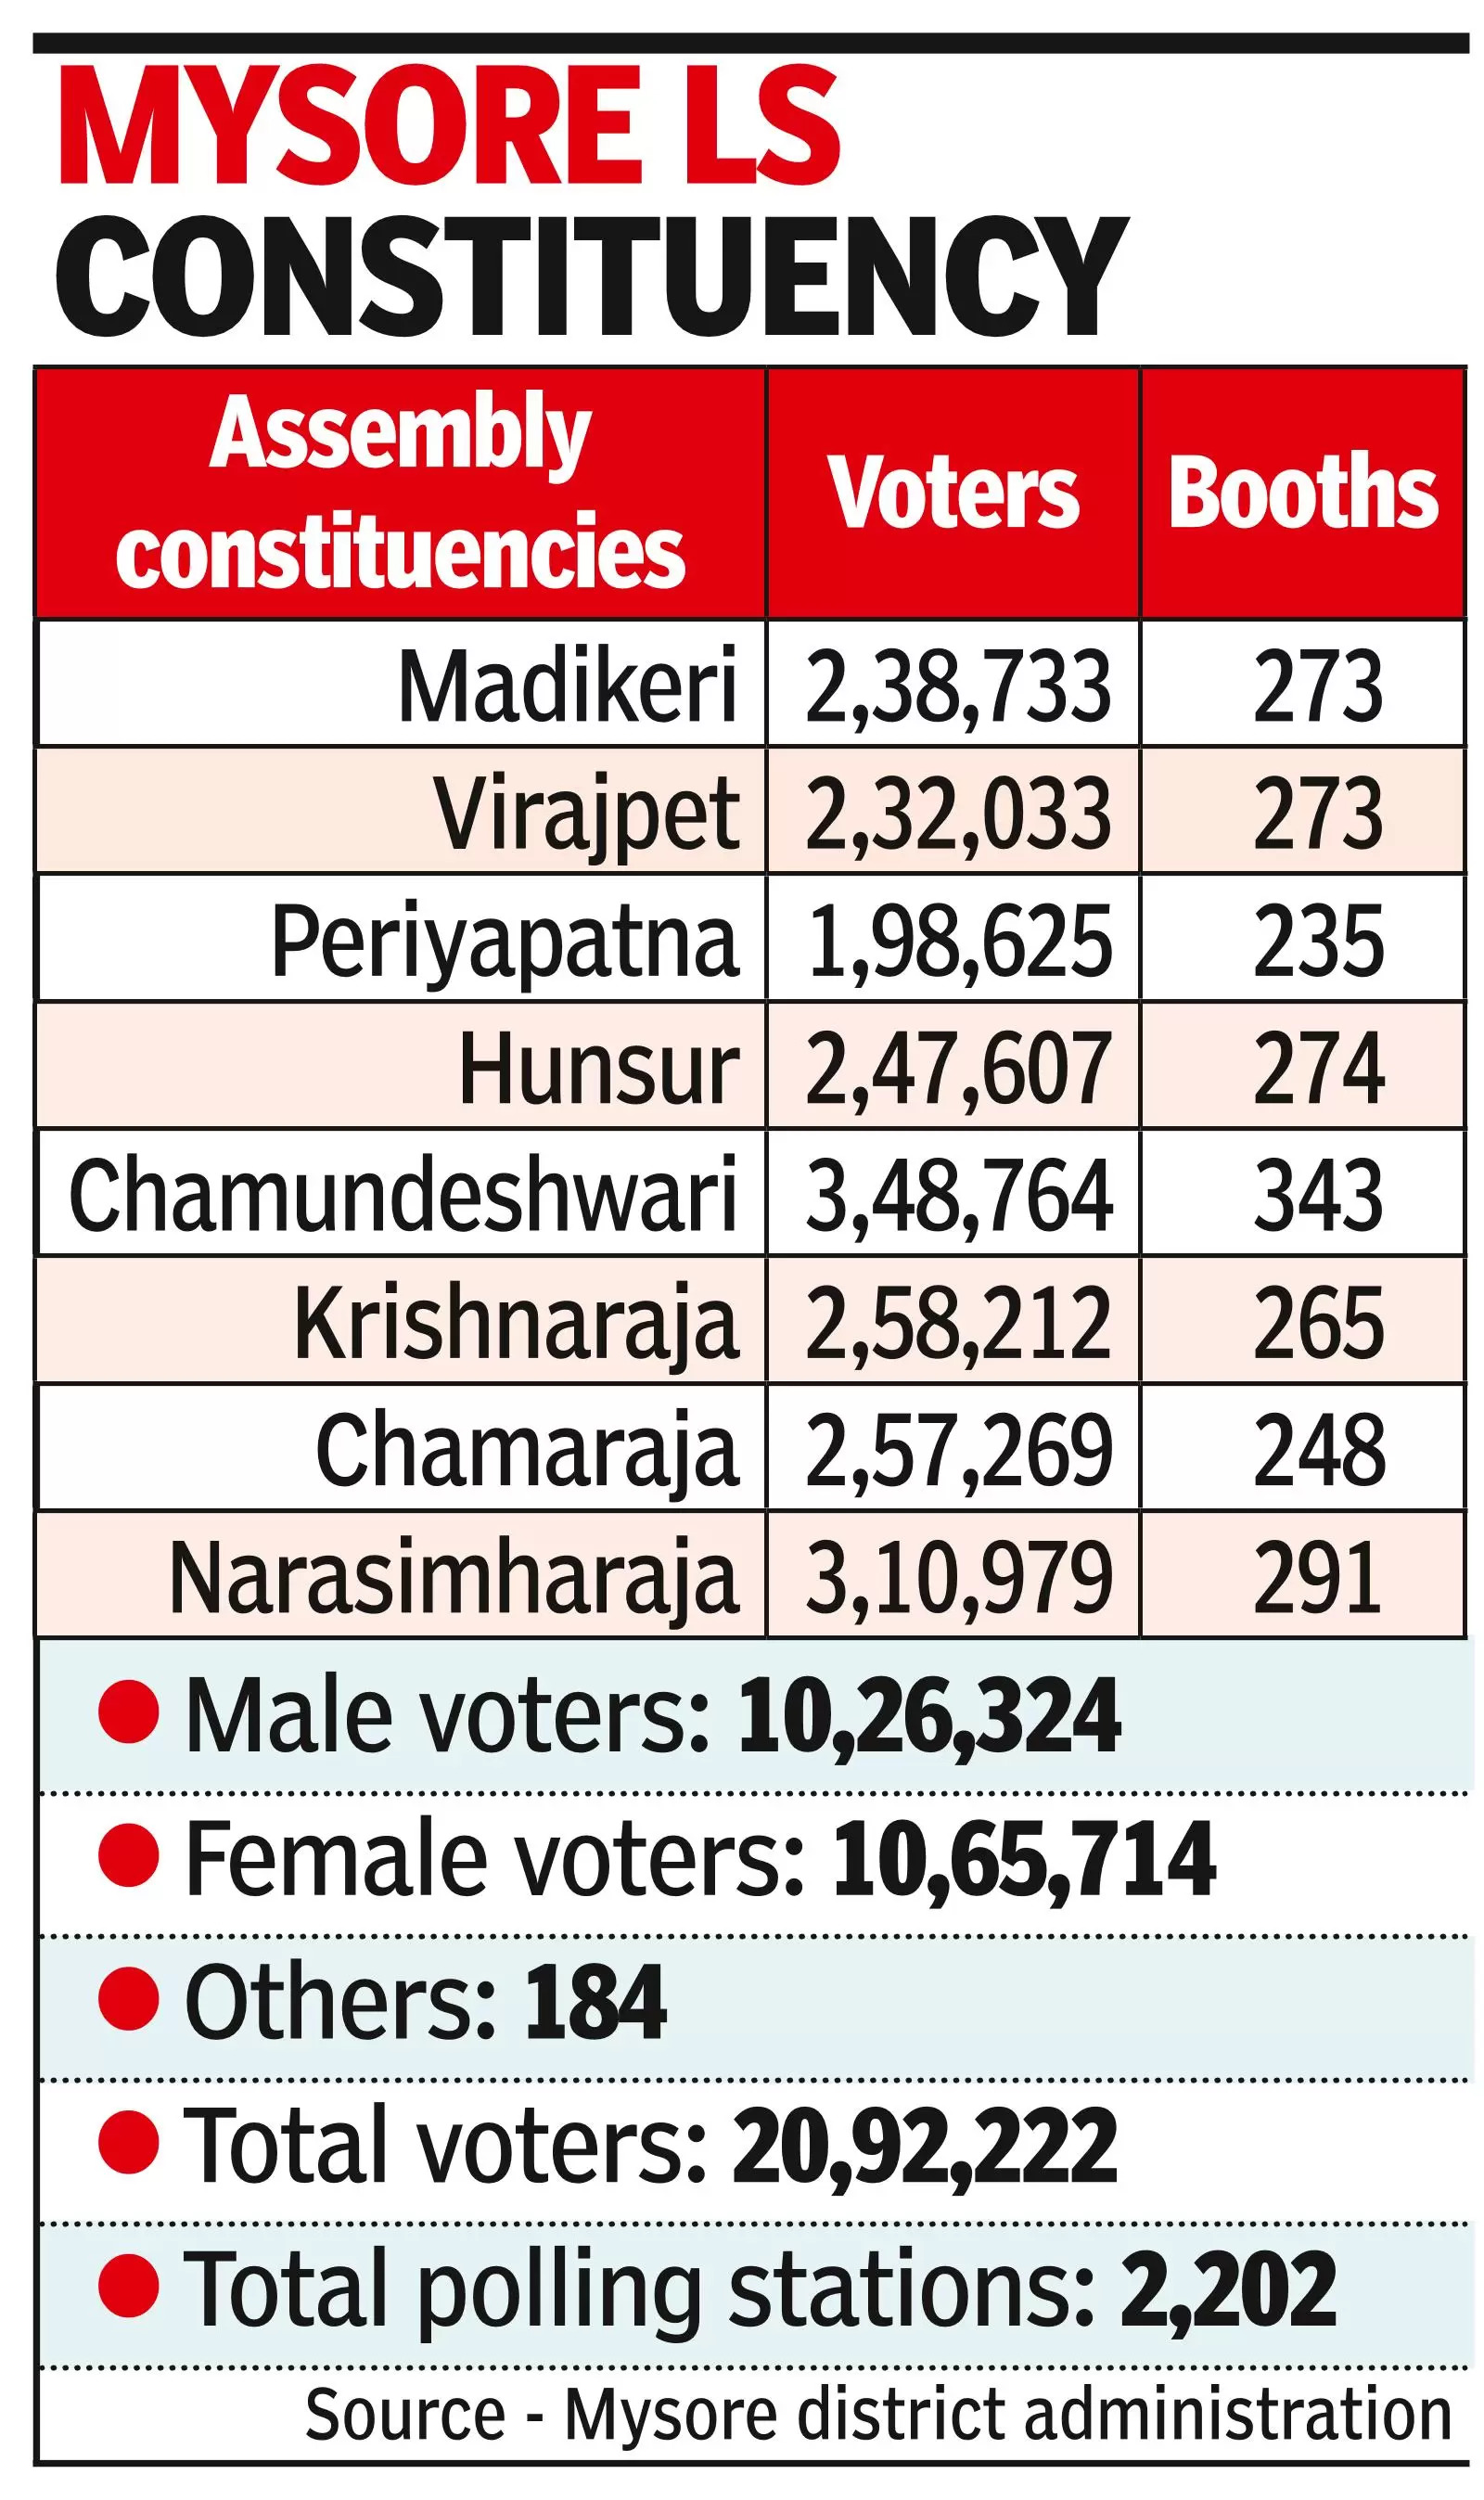 20.9L voters to exercise their right in Mysore on April 26